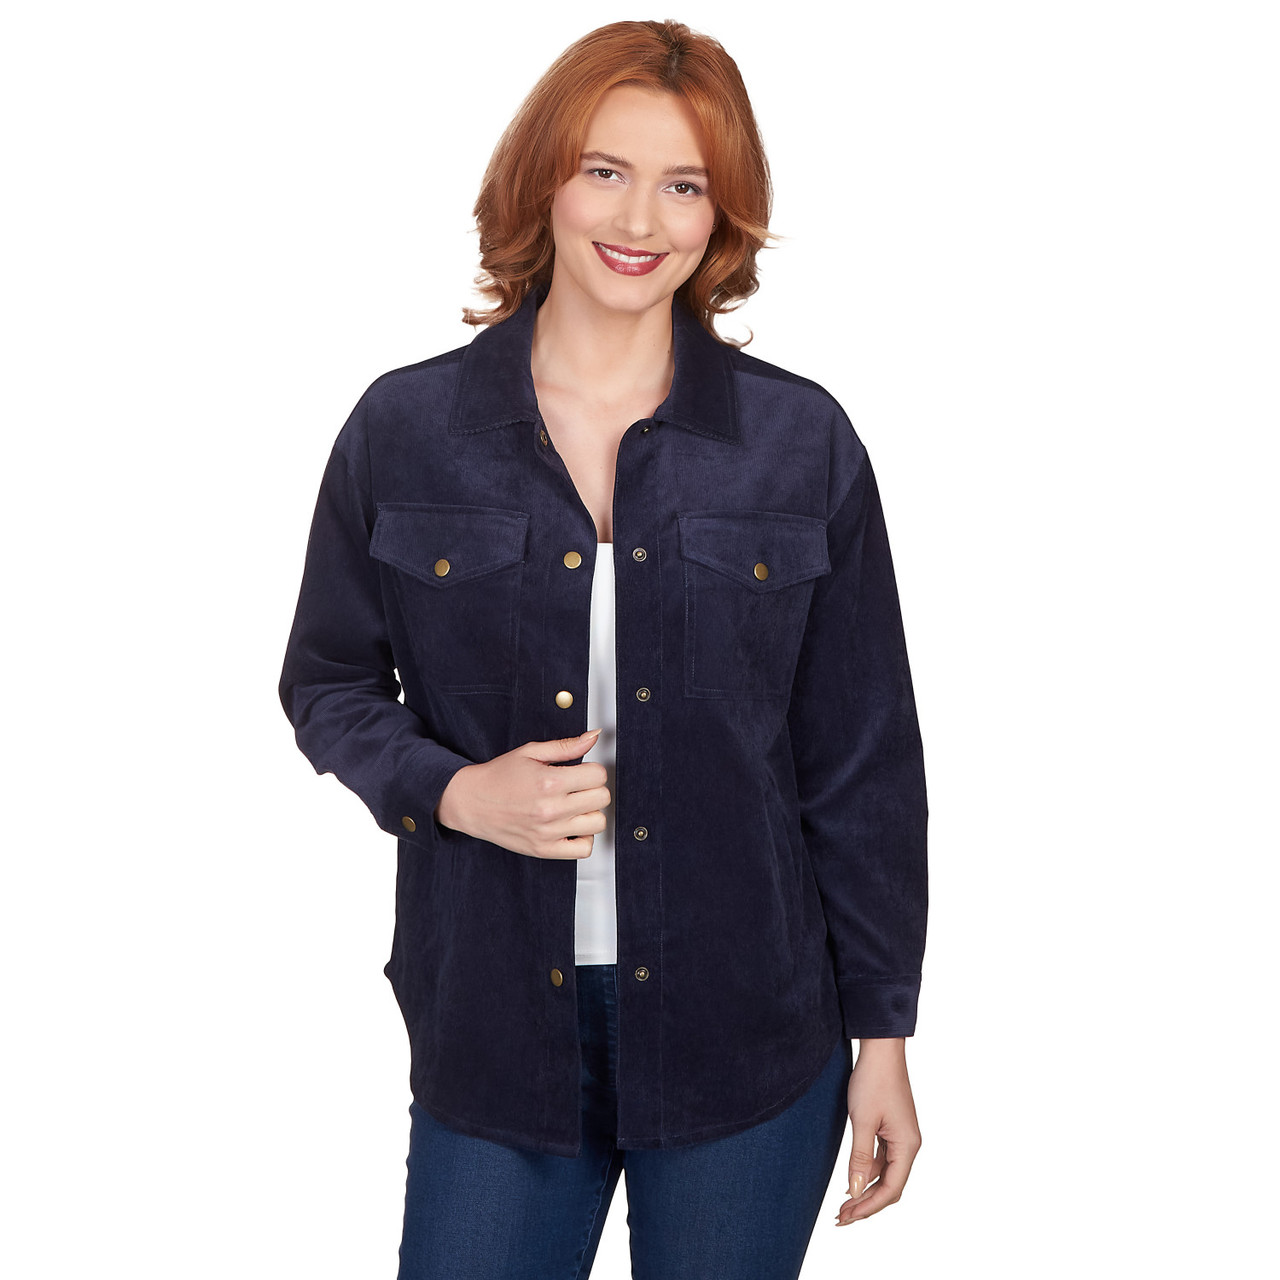 Petite Women's Button Up Solid Pincord Jacket